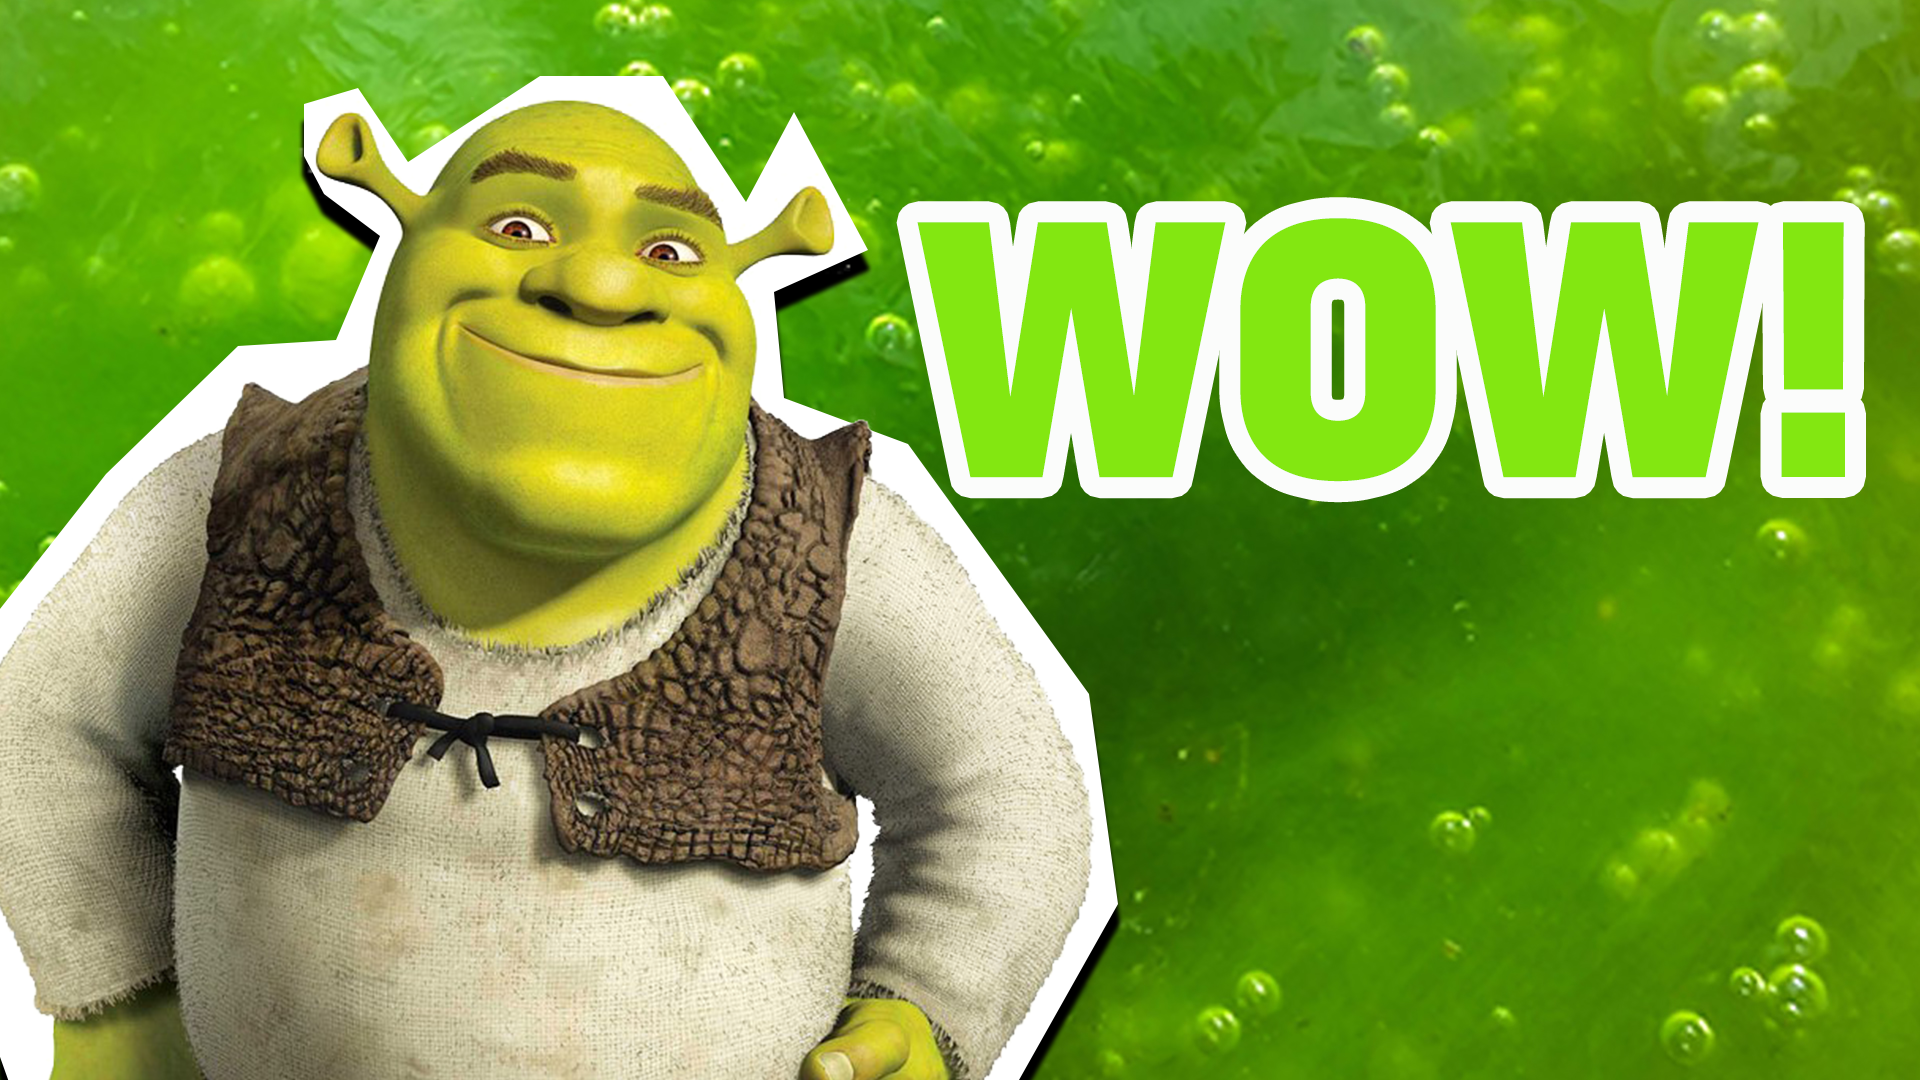 Incredible! You're truly Shrek's greatest fan, because you got 10/10! Congrats!